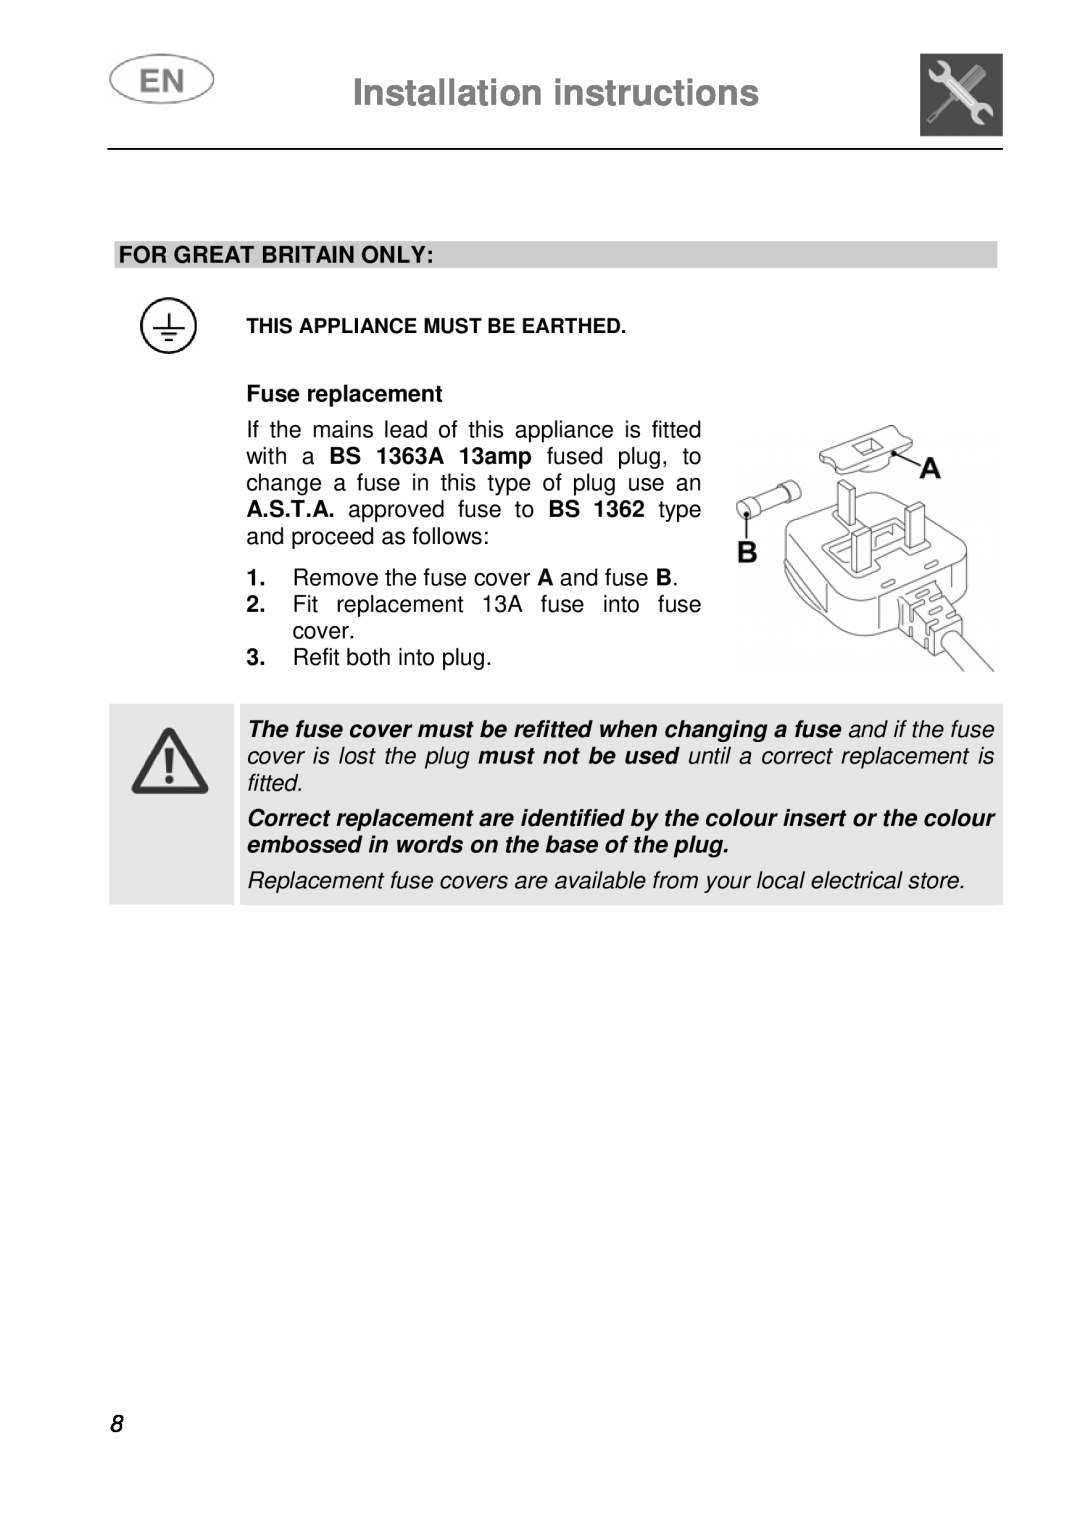 Smeg EN instruction manual For Great Britain Only, Fuse replacement, Installation instructions 